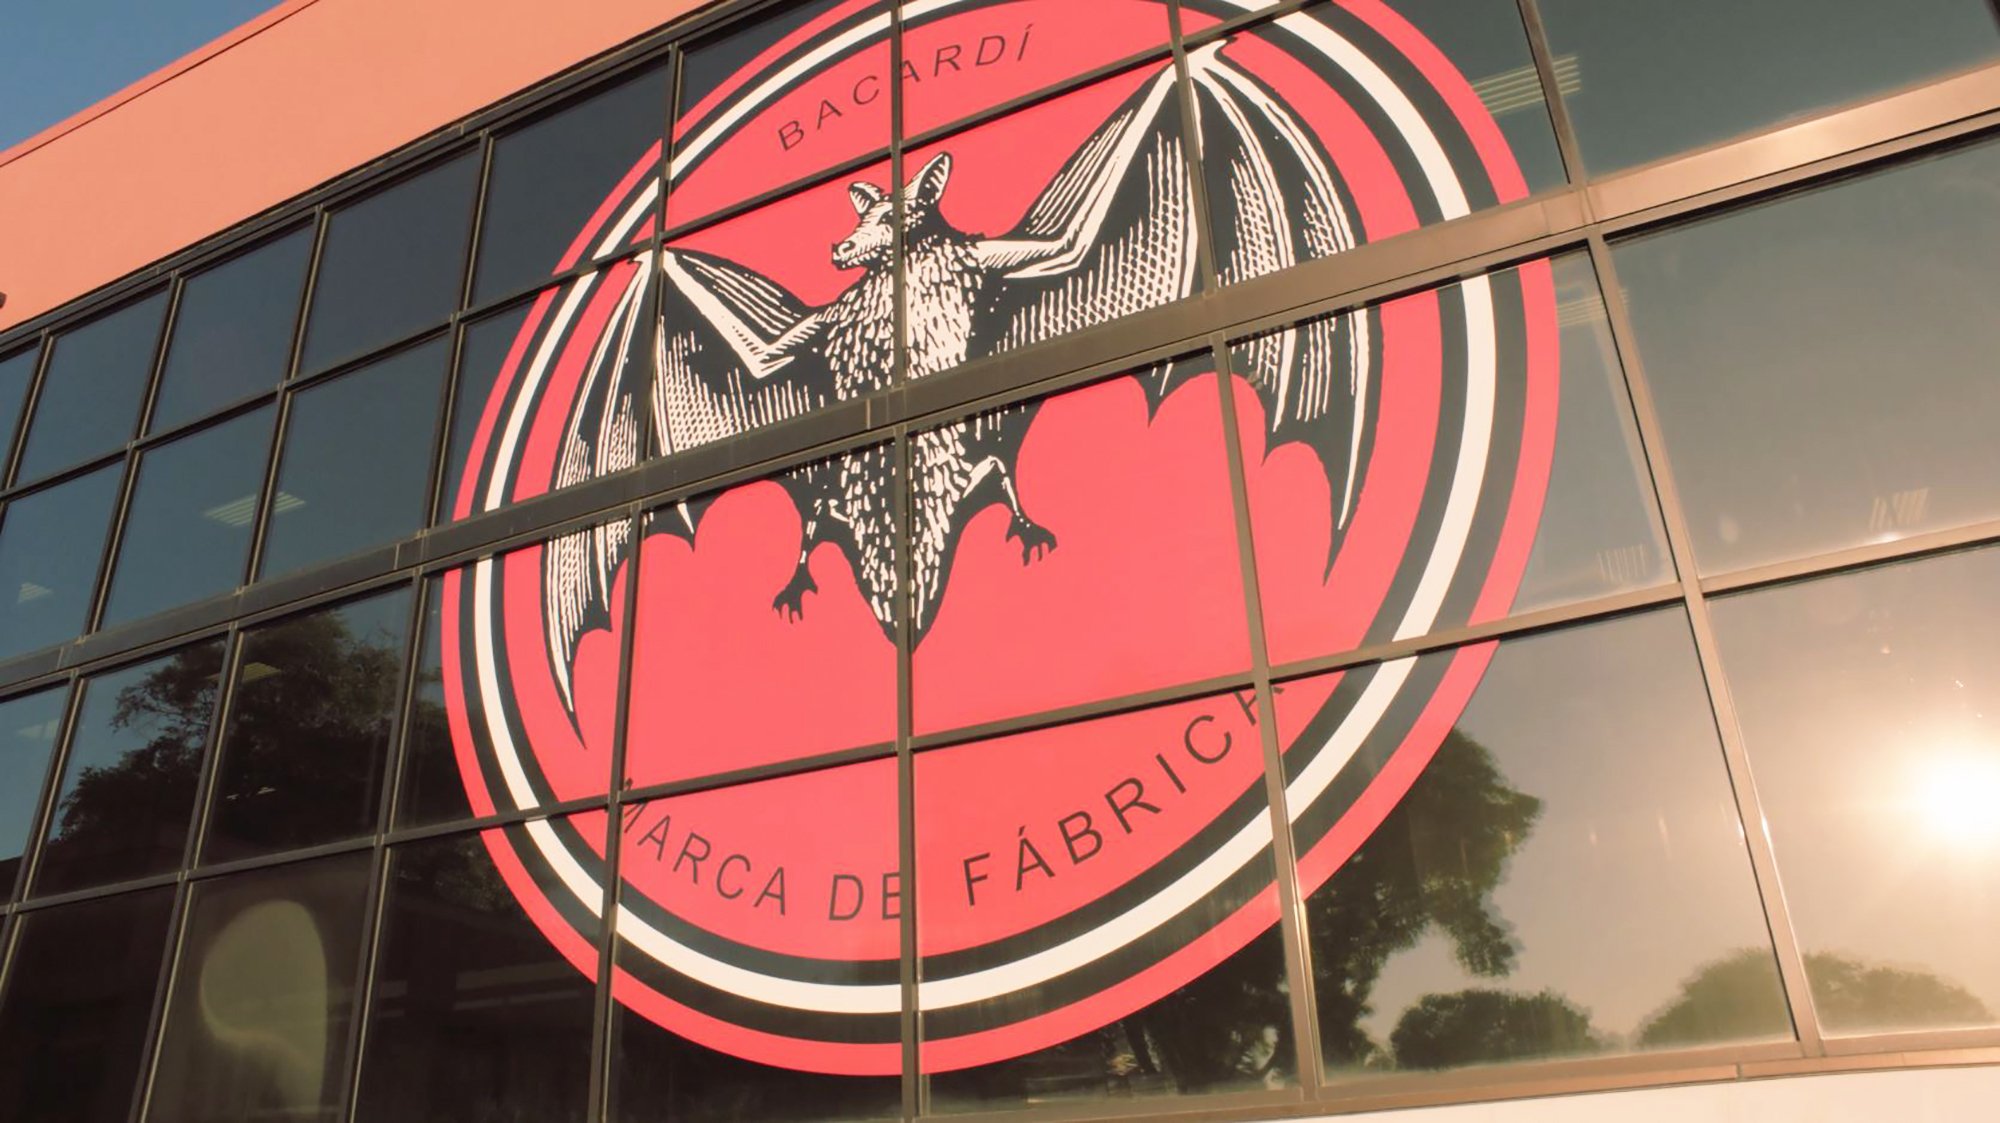 Don Facundo Bacardi Masso founded Bacardi in 1862. The company says the founder’s wife, Dona Amalia, noticed a colony of fruit bats hanging in the rafters of the distillery and suggested adopting the bat as the company symbol.